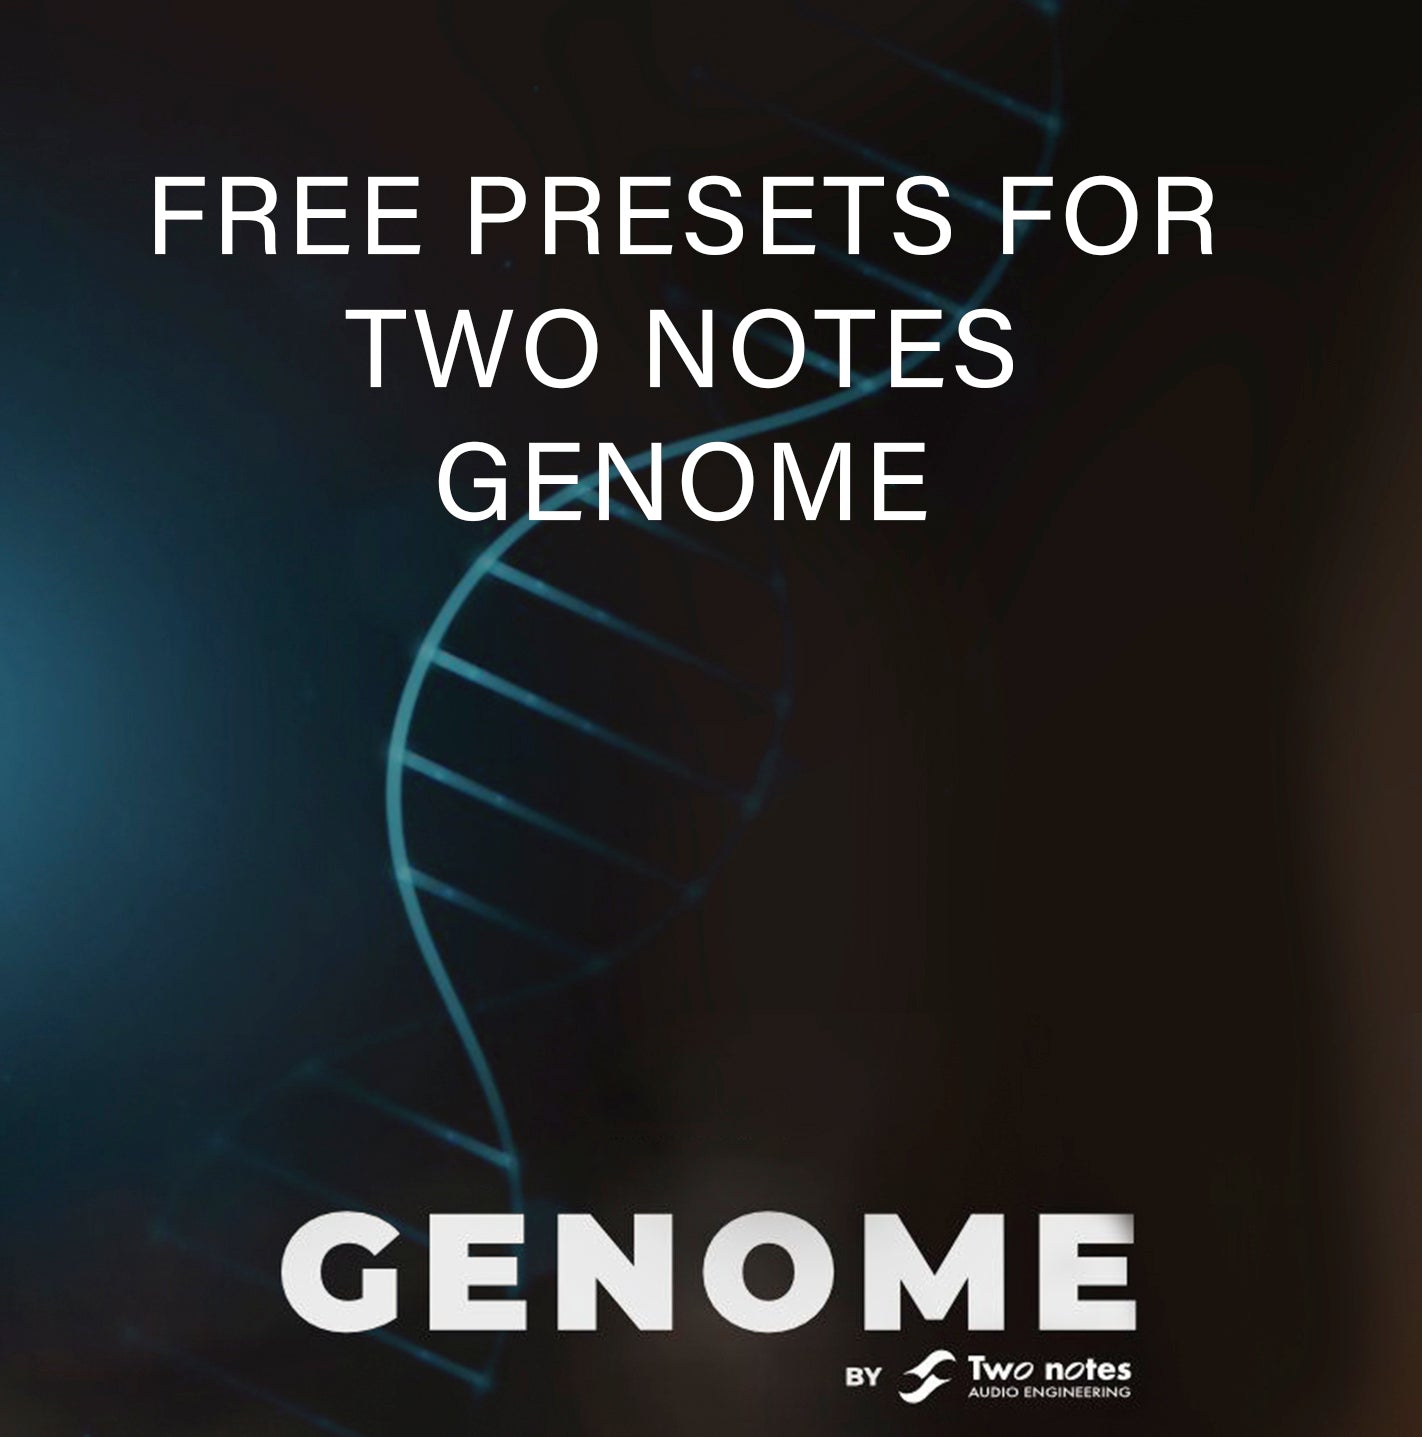 FREE Two Notes GENOME